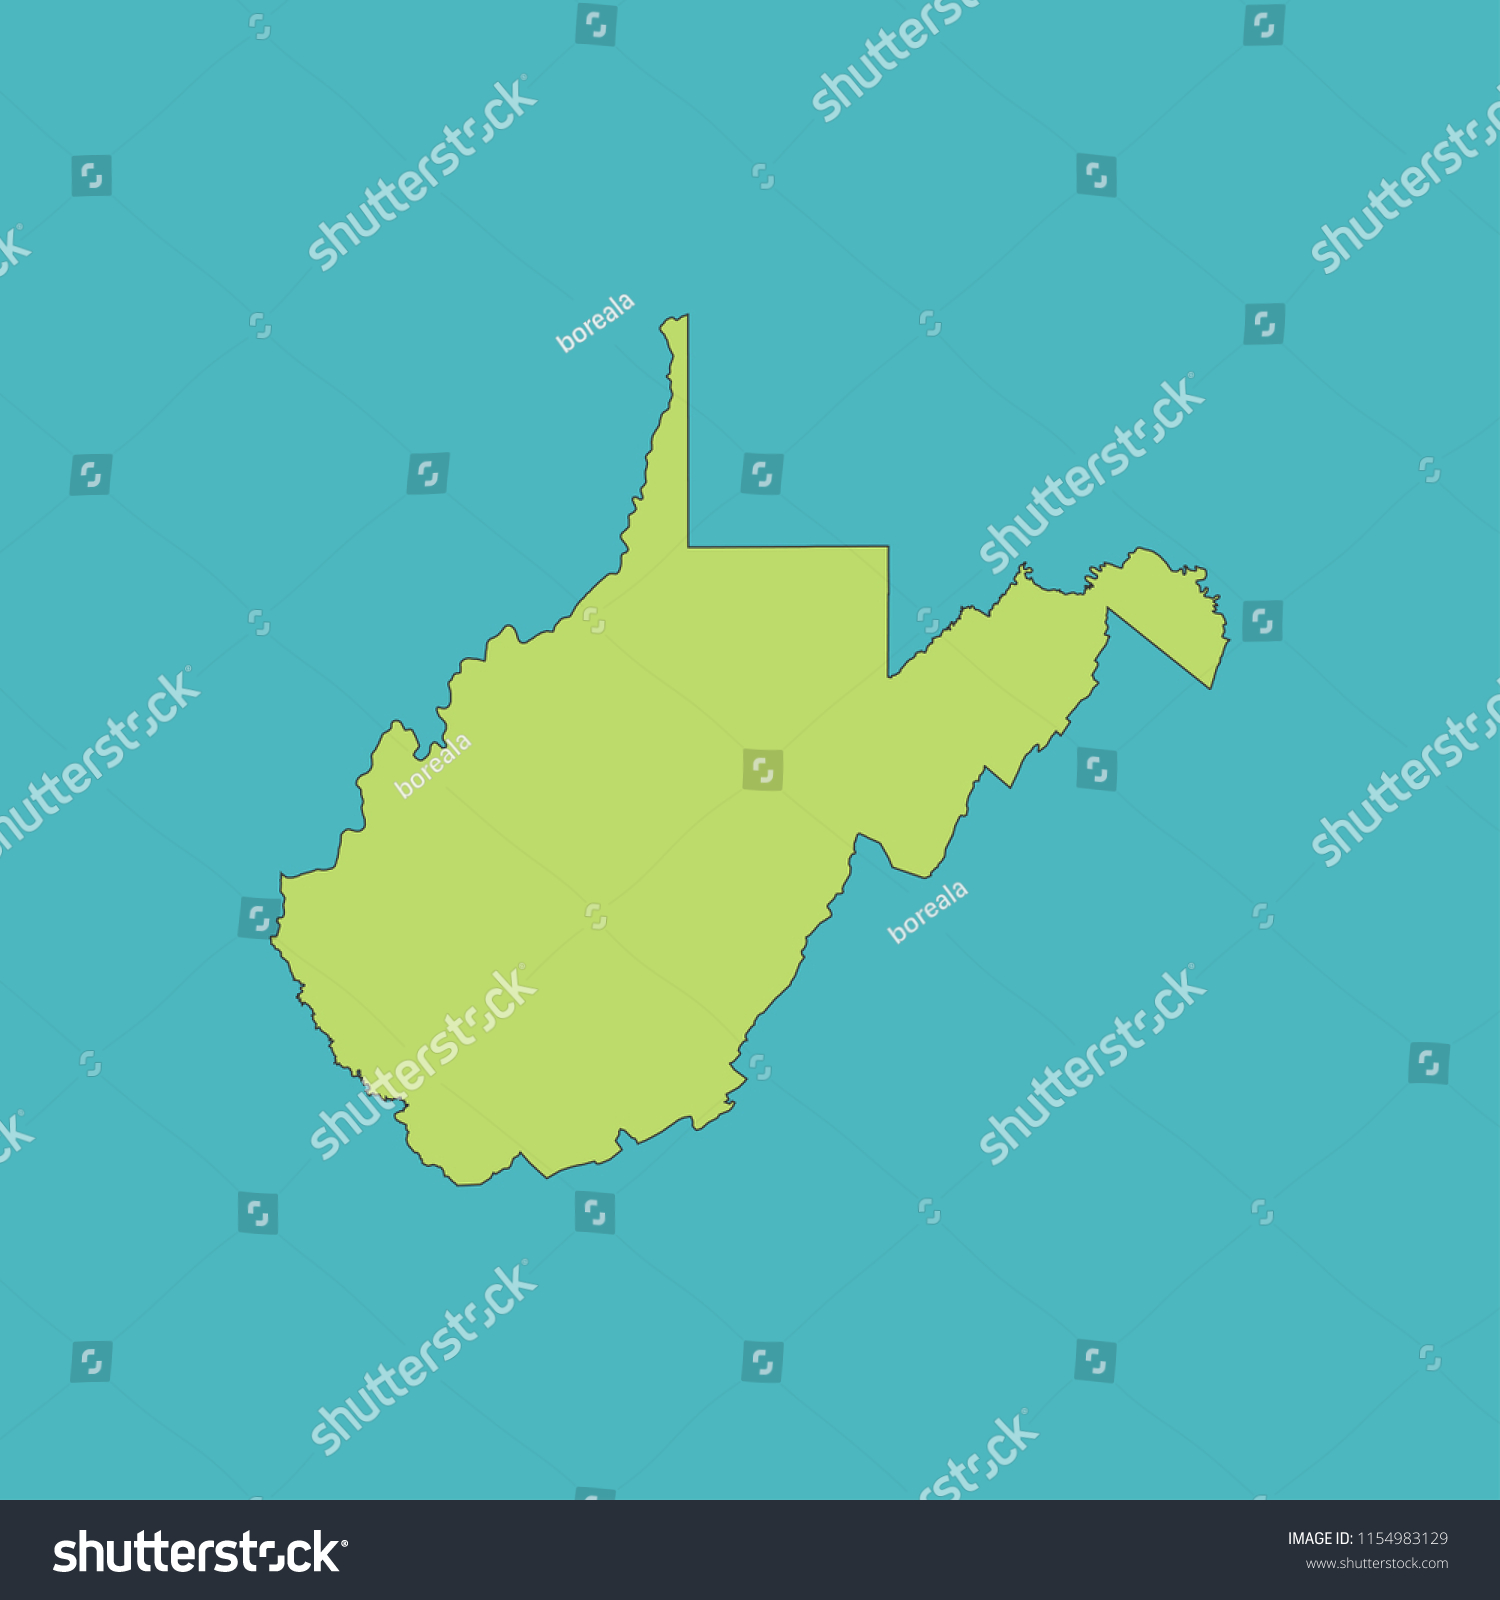 Map Of West Virginia Royalty Free Stock Vector 1154983129 8056